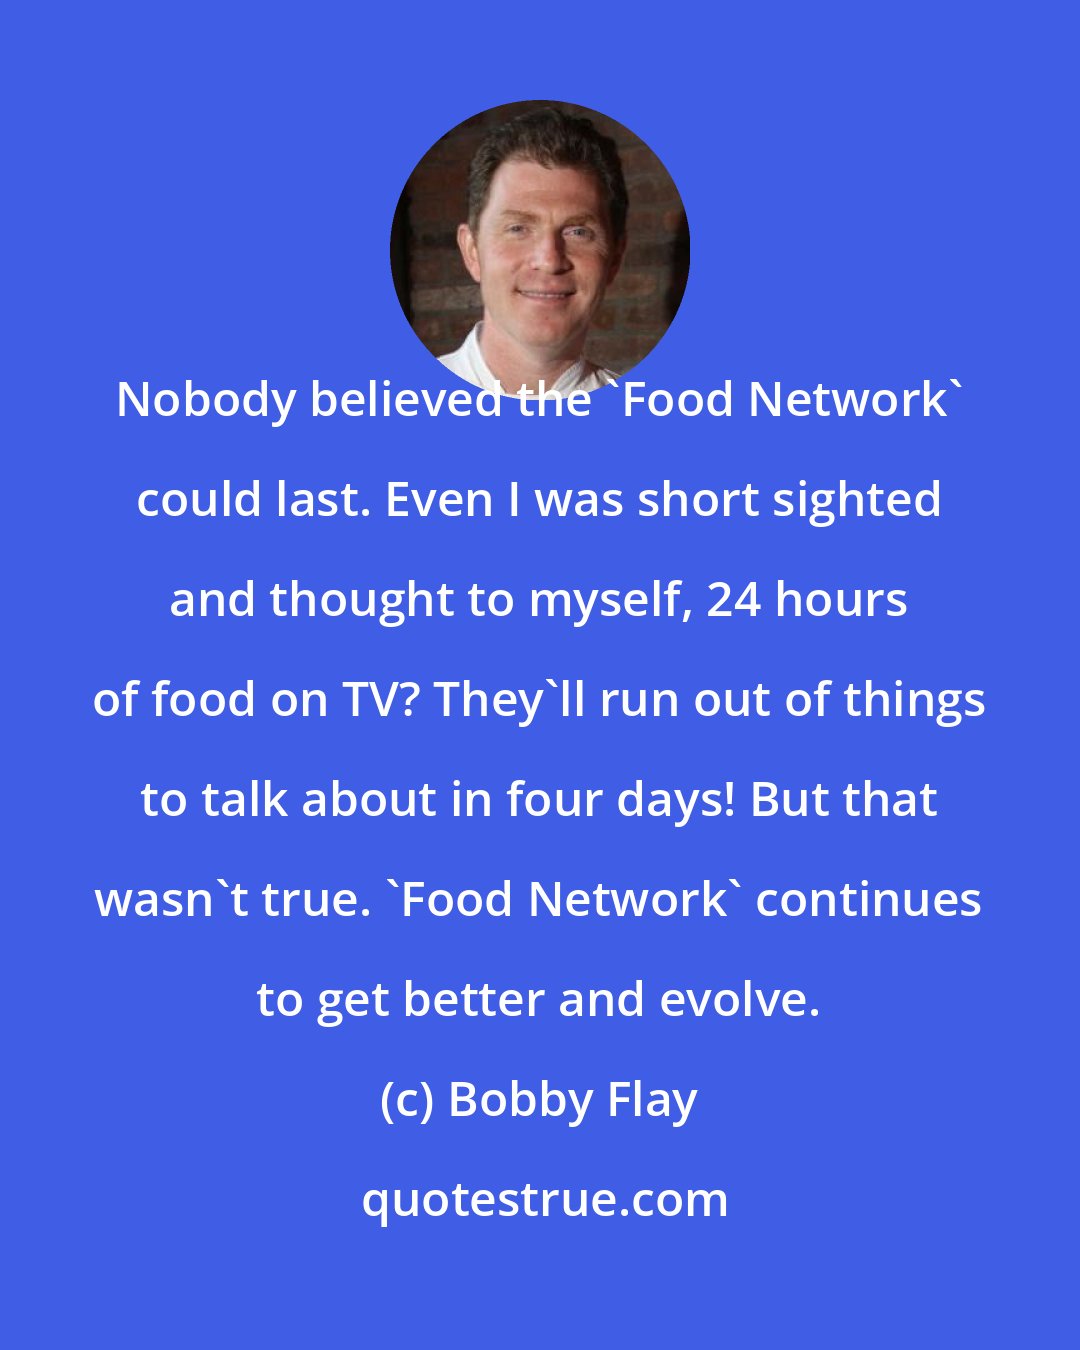 Bobby Flay: Nobody believed the 'Food Network' could last. Even I was short sighted and thought to myself, 24 hours of food on TV? They'll run out of things to talk about in four days! But that wasn't true. 'Food Network' continues to get better and evolve.